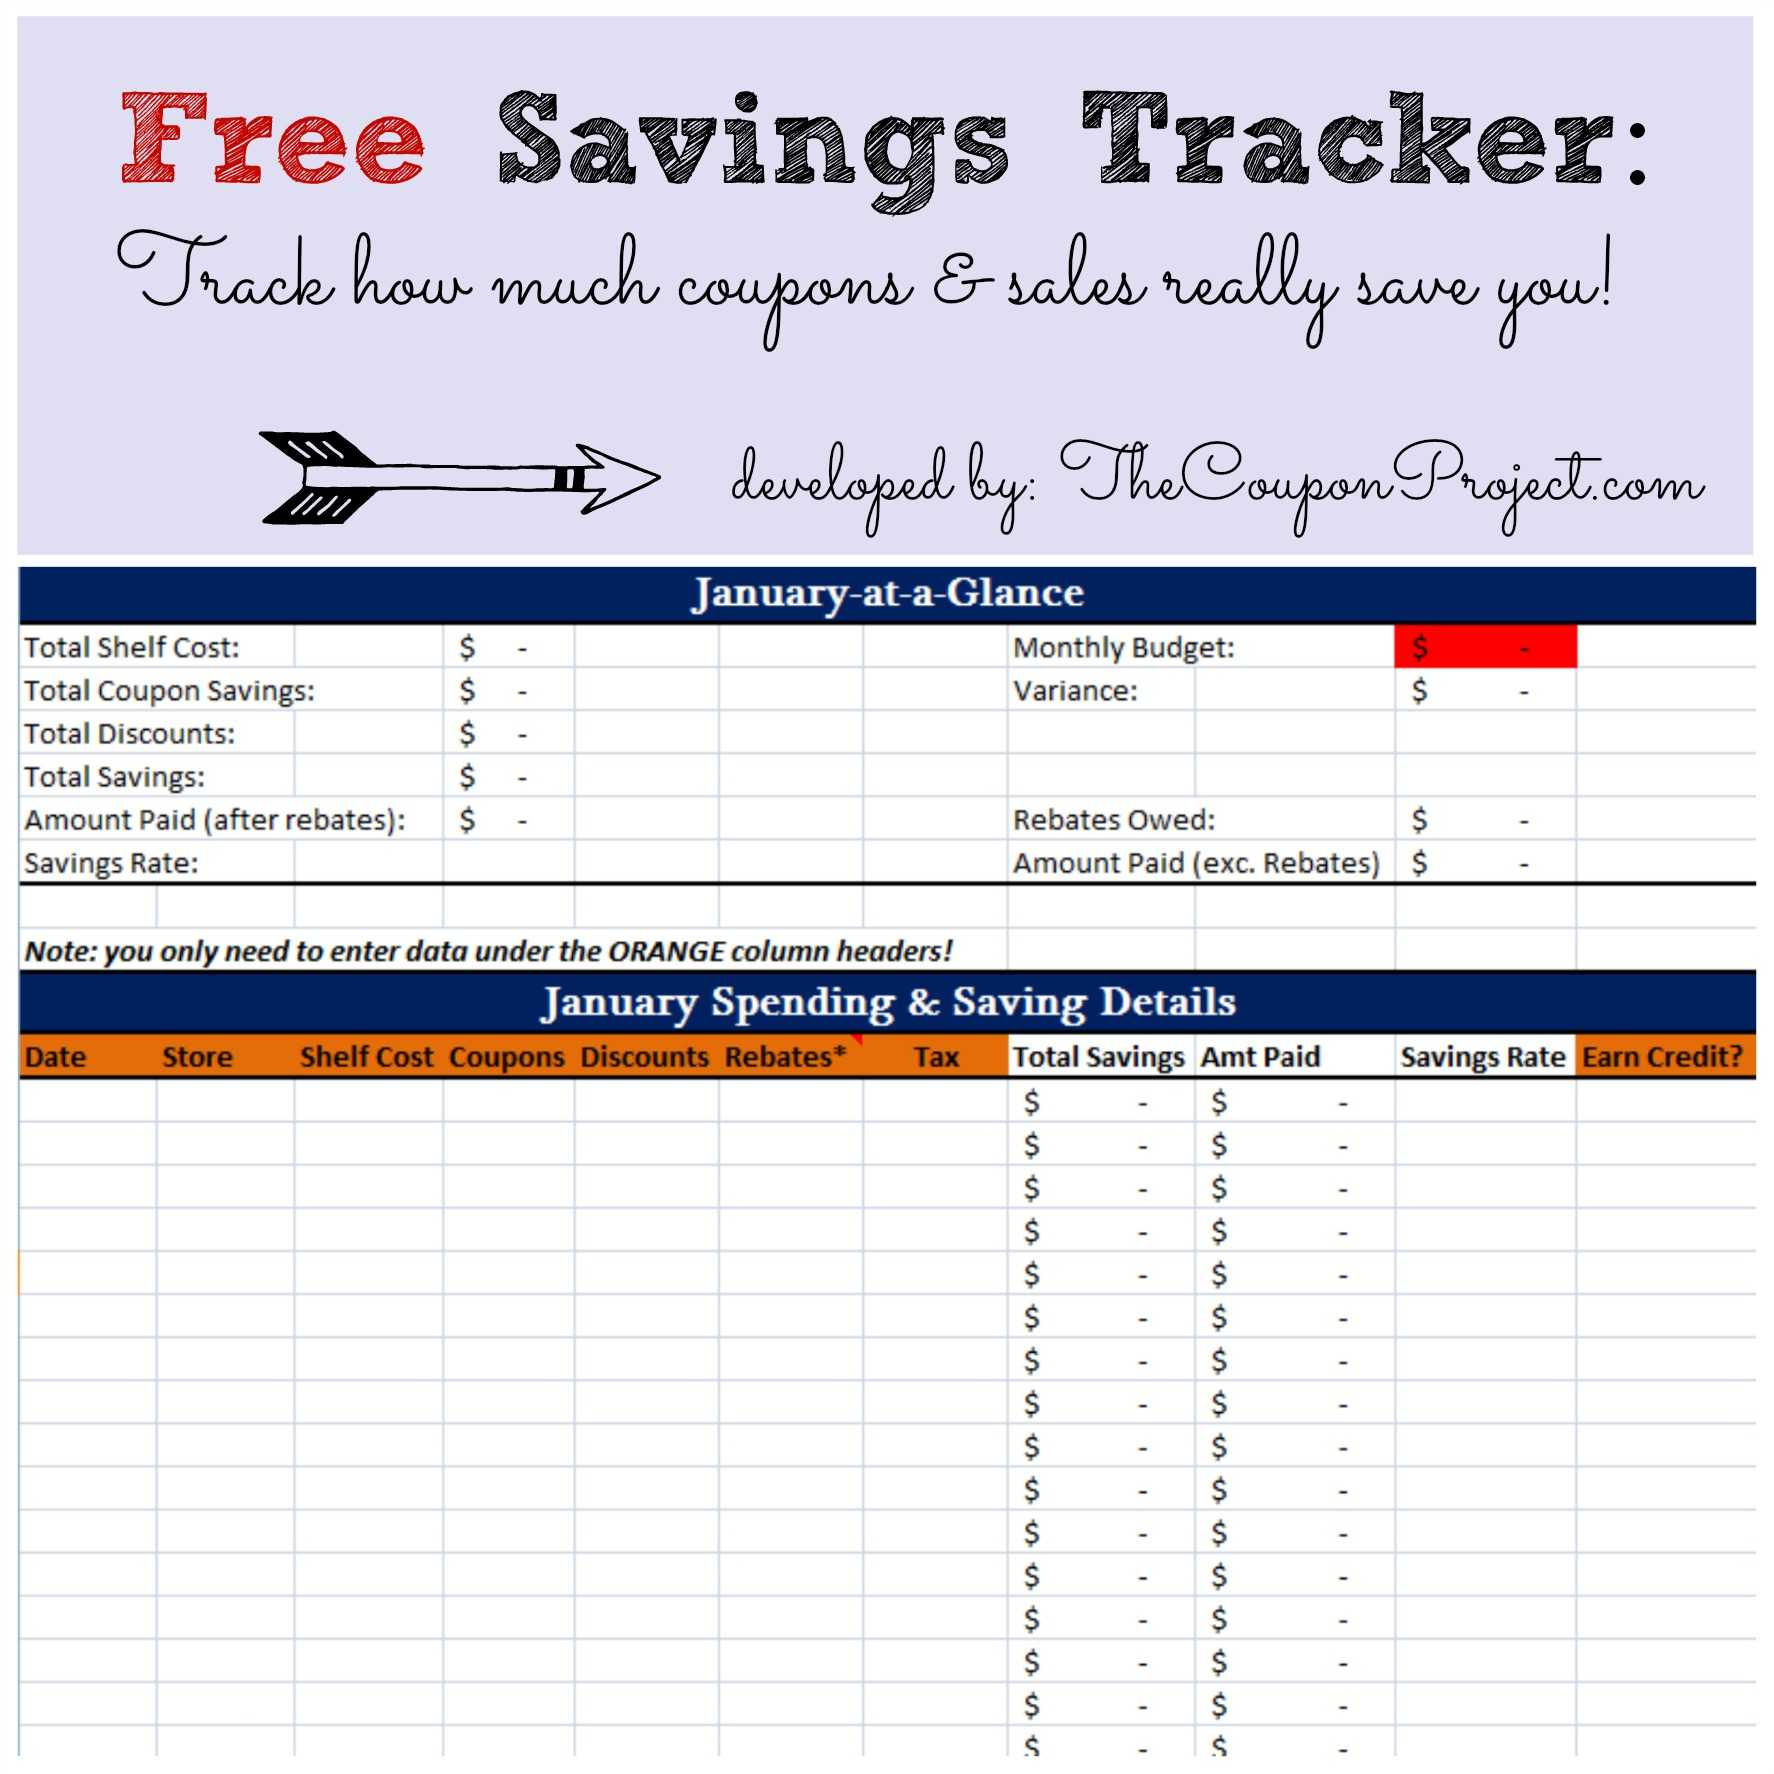 Tax Deduction Tracker Spreadsheet For 12 New Tax Deduction Tracker Spreadsheet  Twables.site